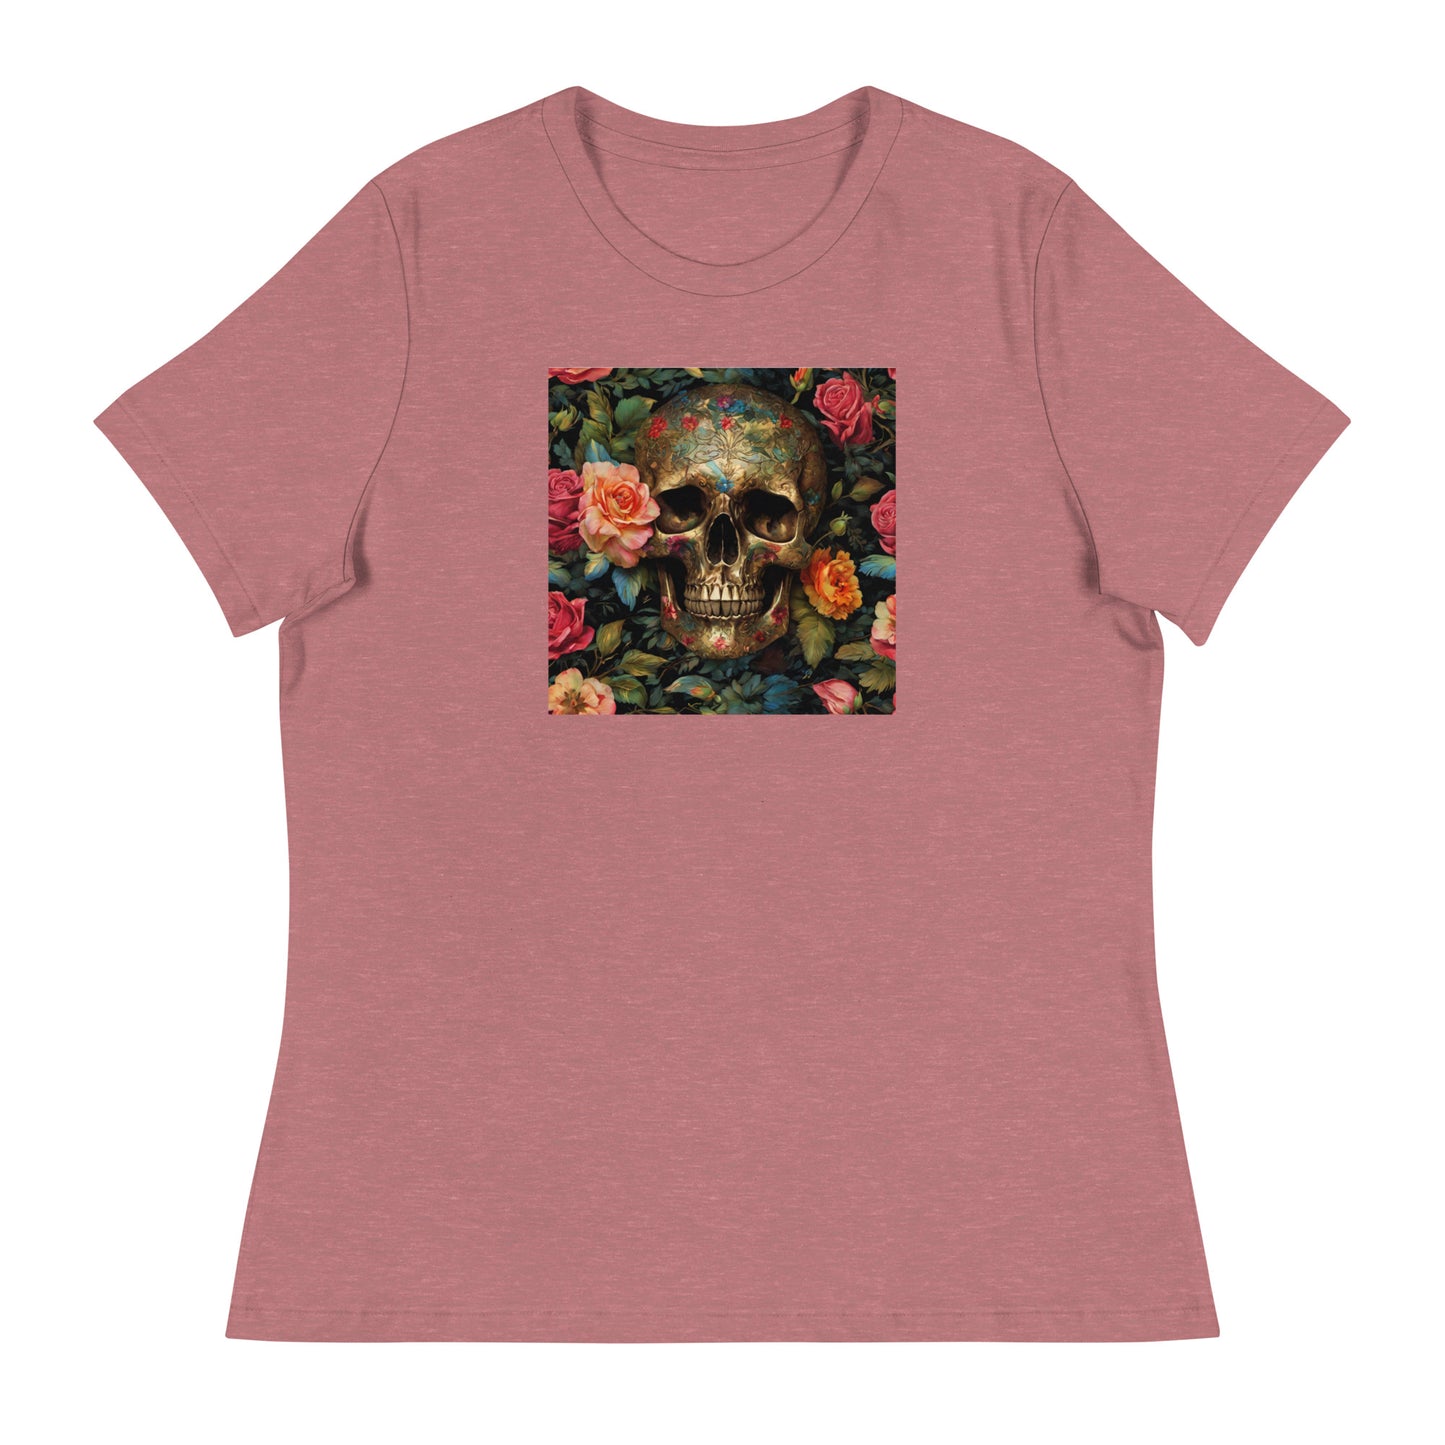 Skull and Roses Graphic Women's T-Shirt Heather Mauve